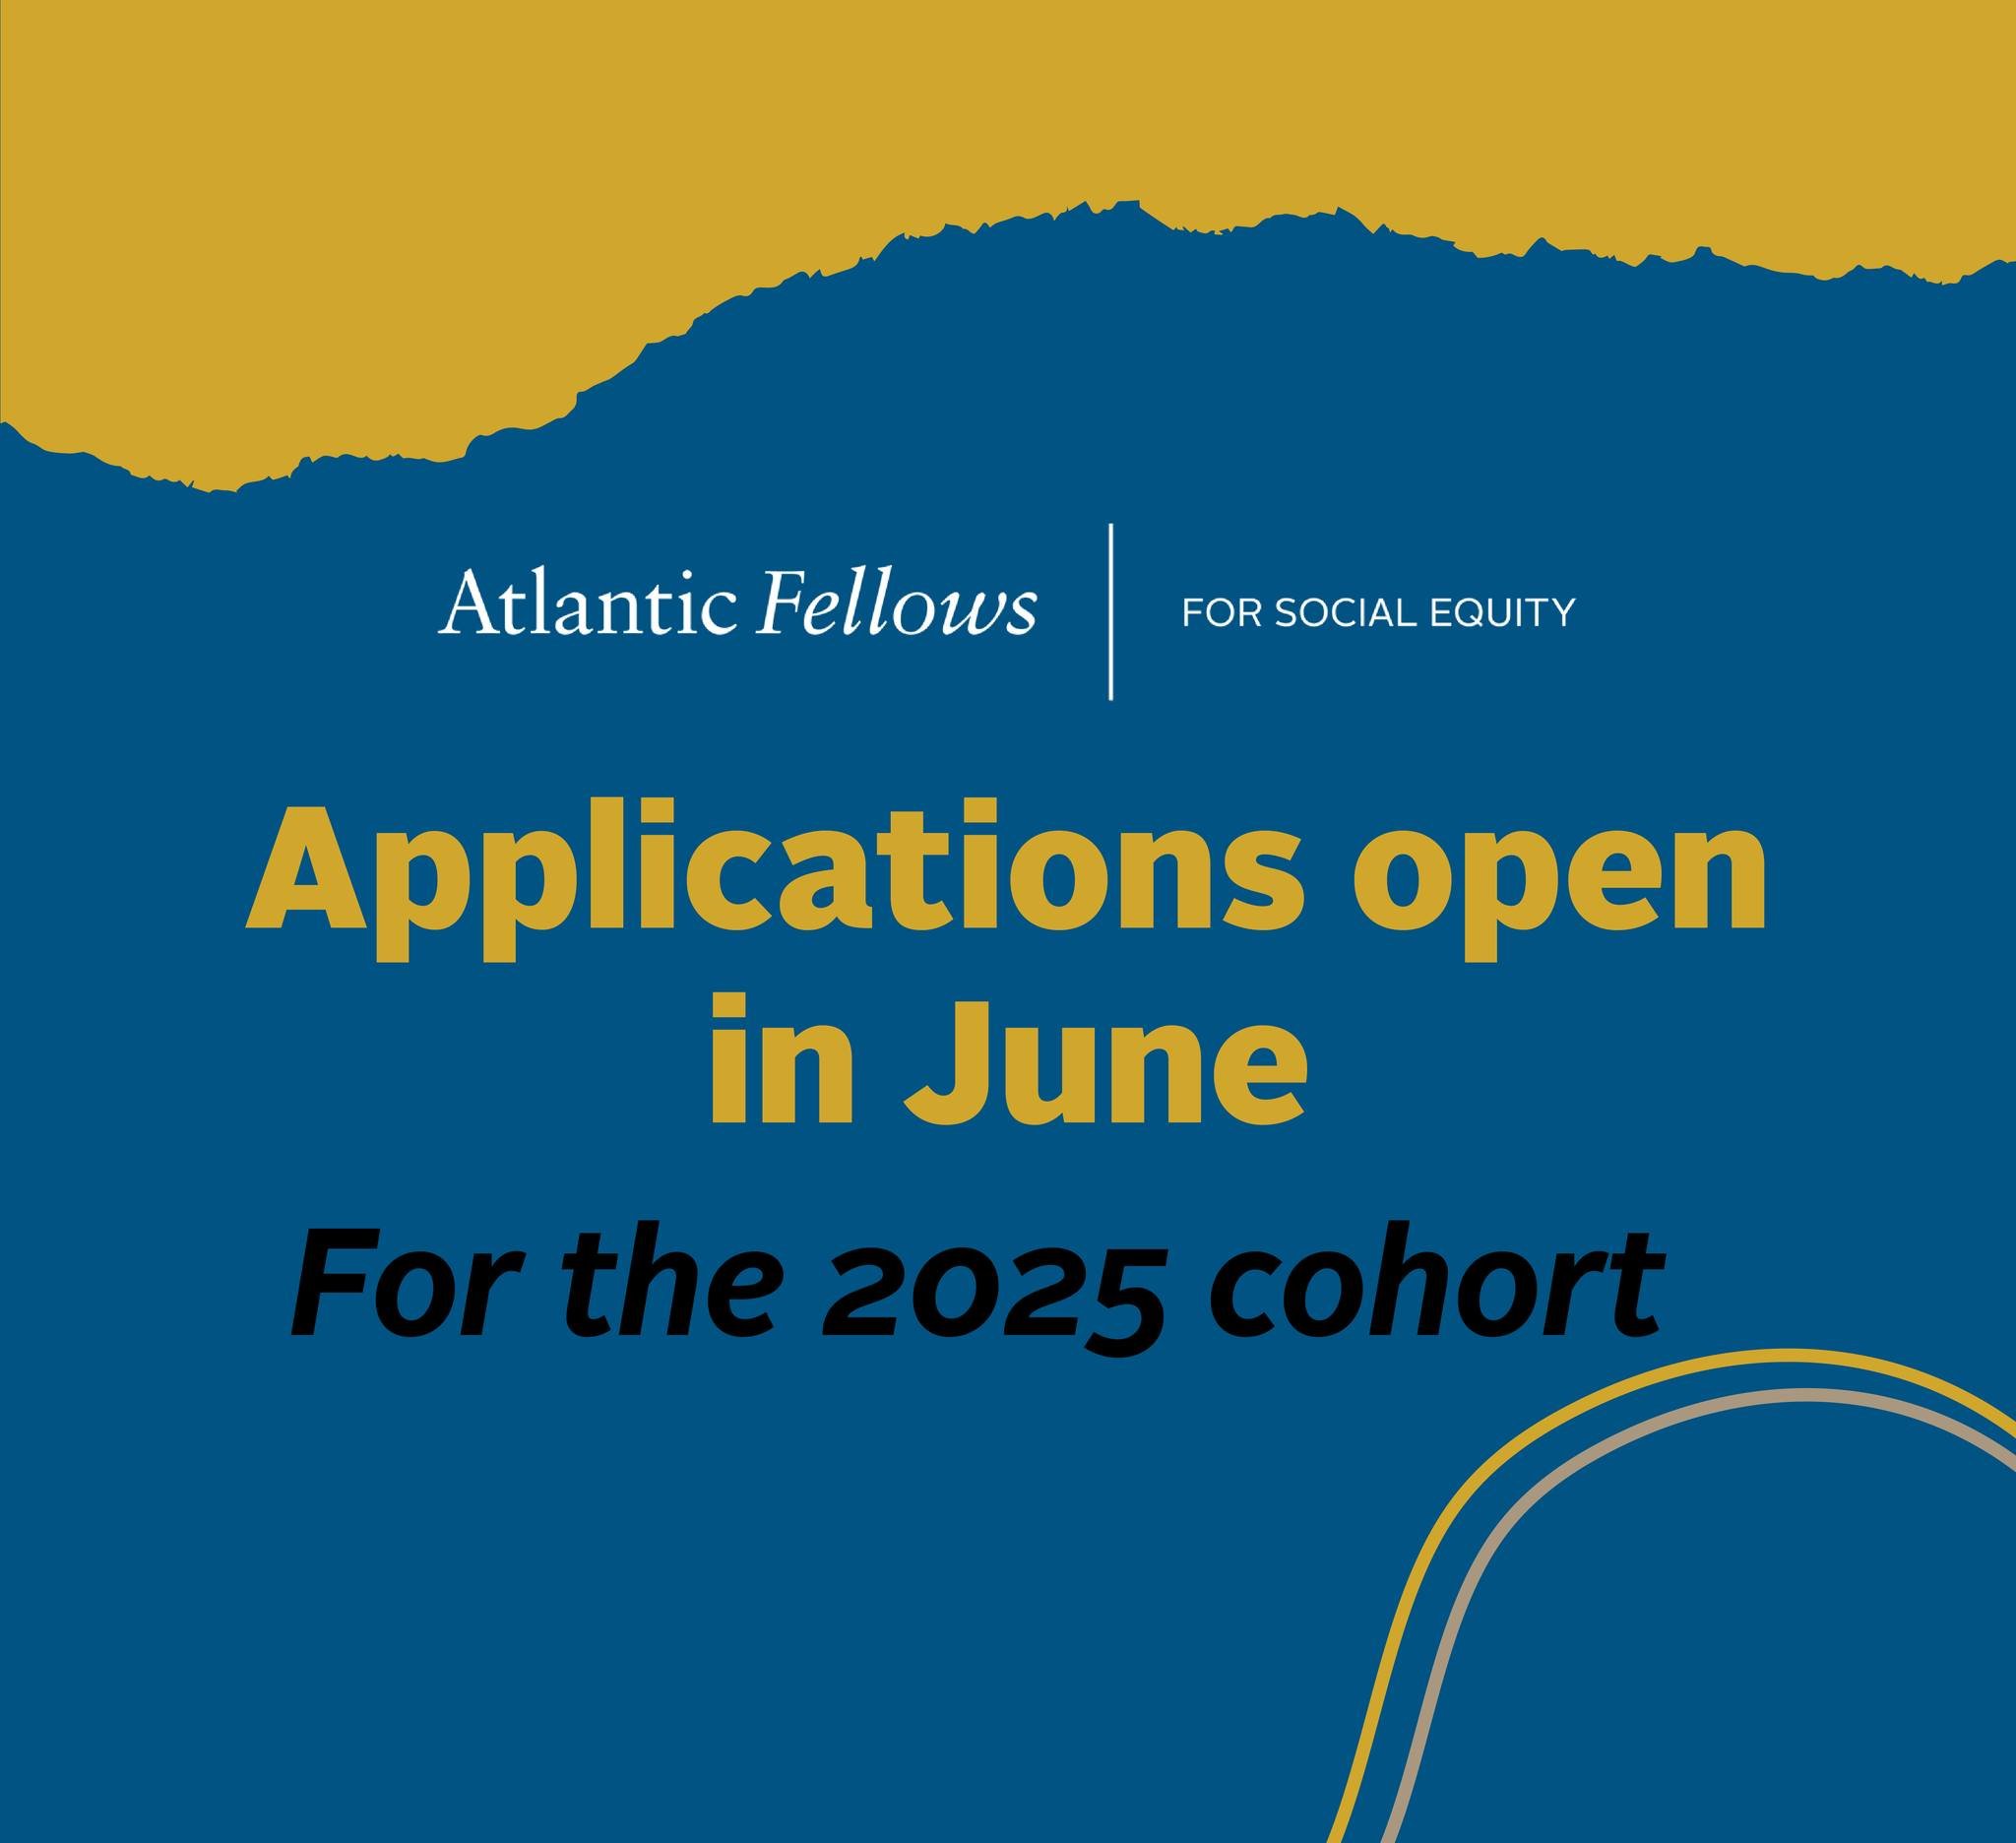 Looking to apply for the 2025 cohort of Atlantic Fellows for Social Equity? 
Applications open in June. 

Visit the AFSE website to subscribe to our Enewsletter to get application info straight to your inbox.